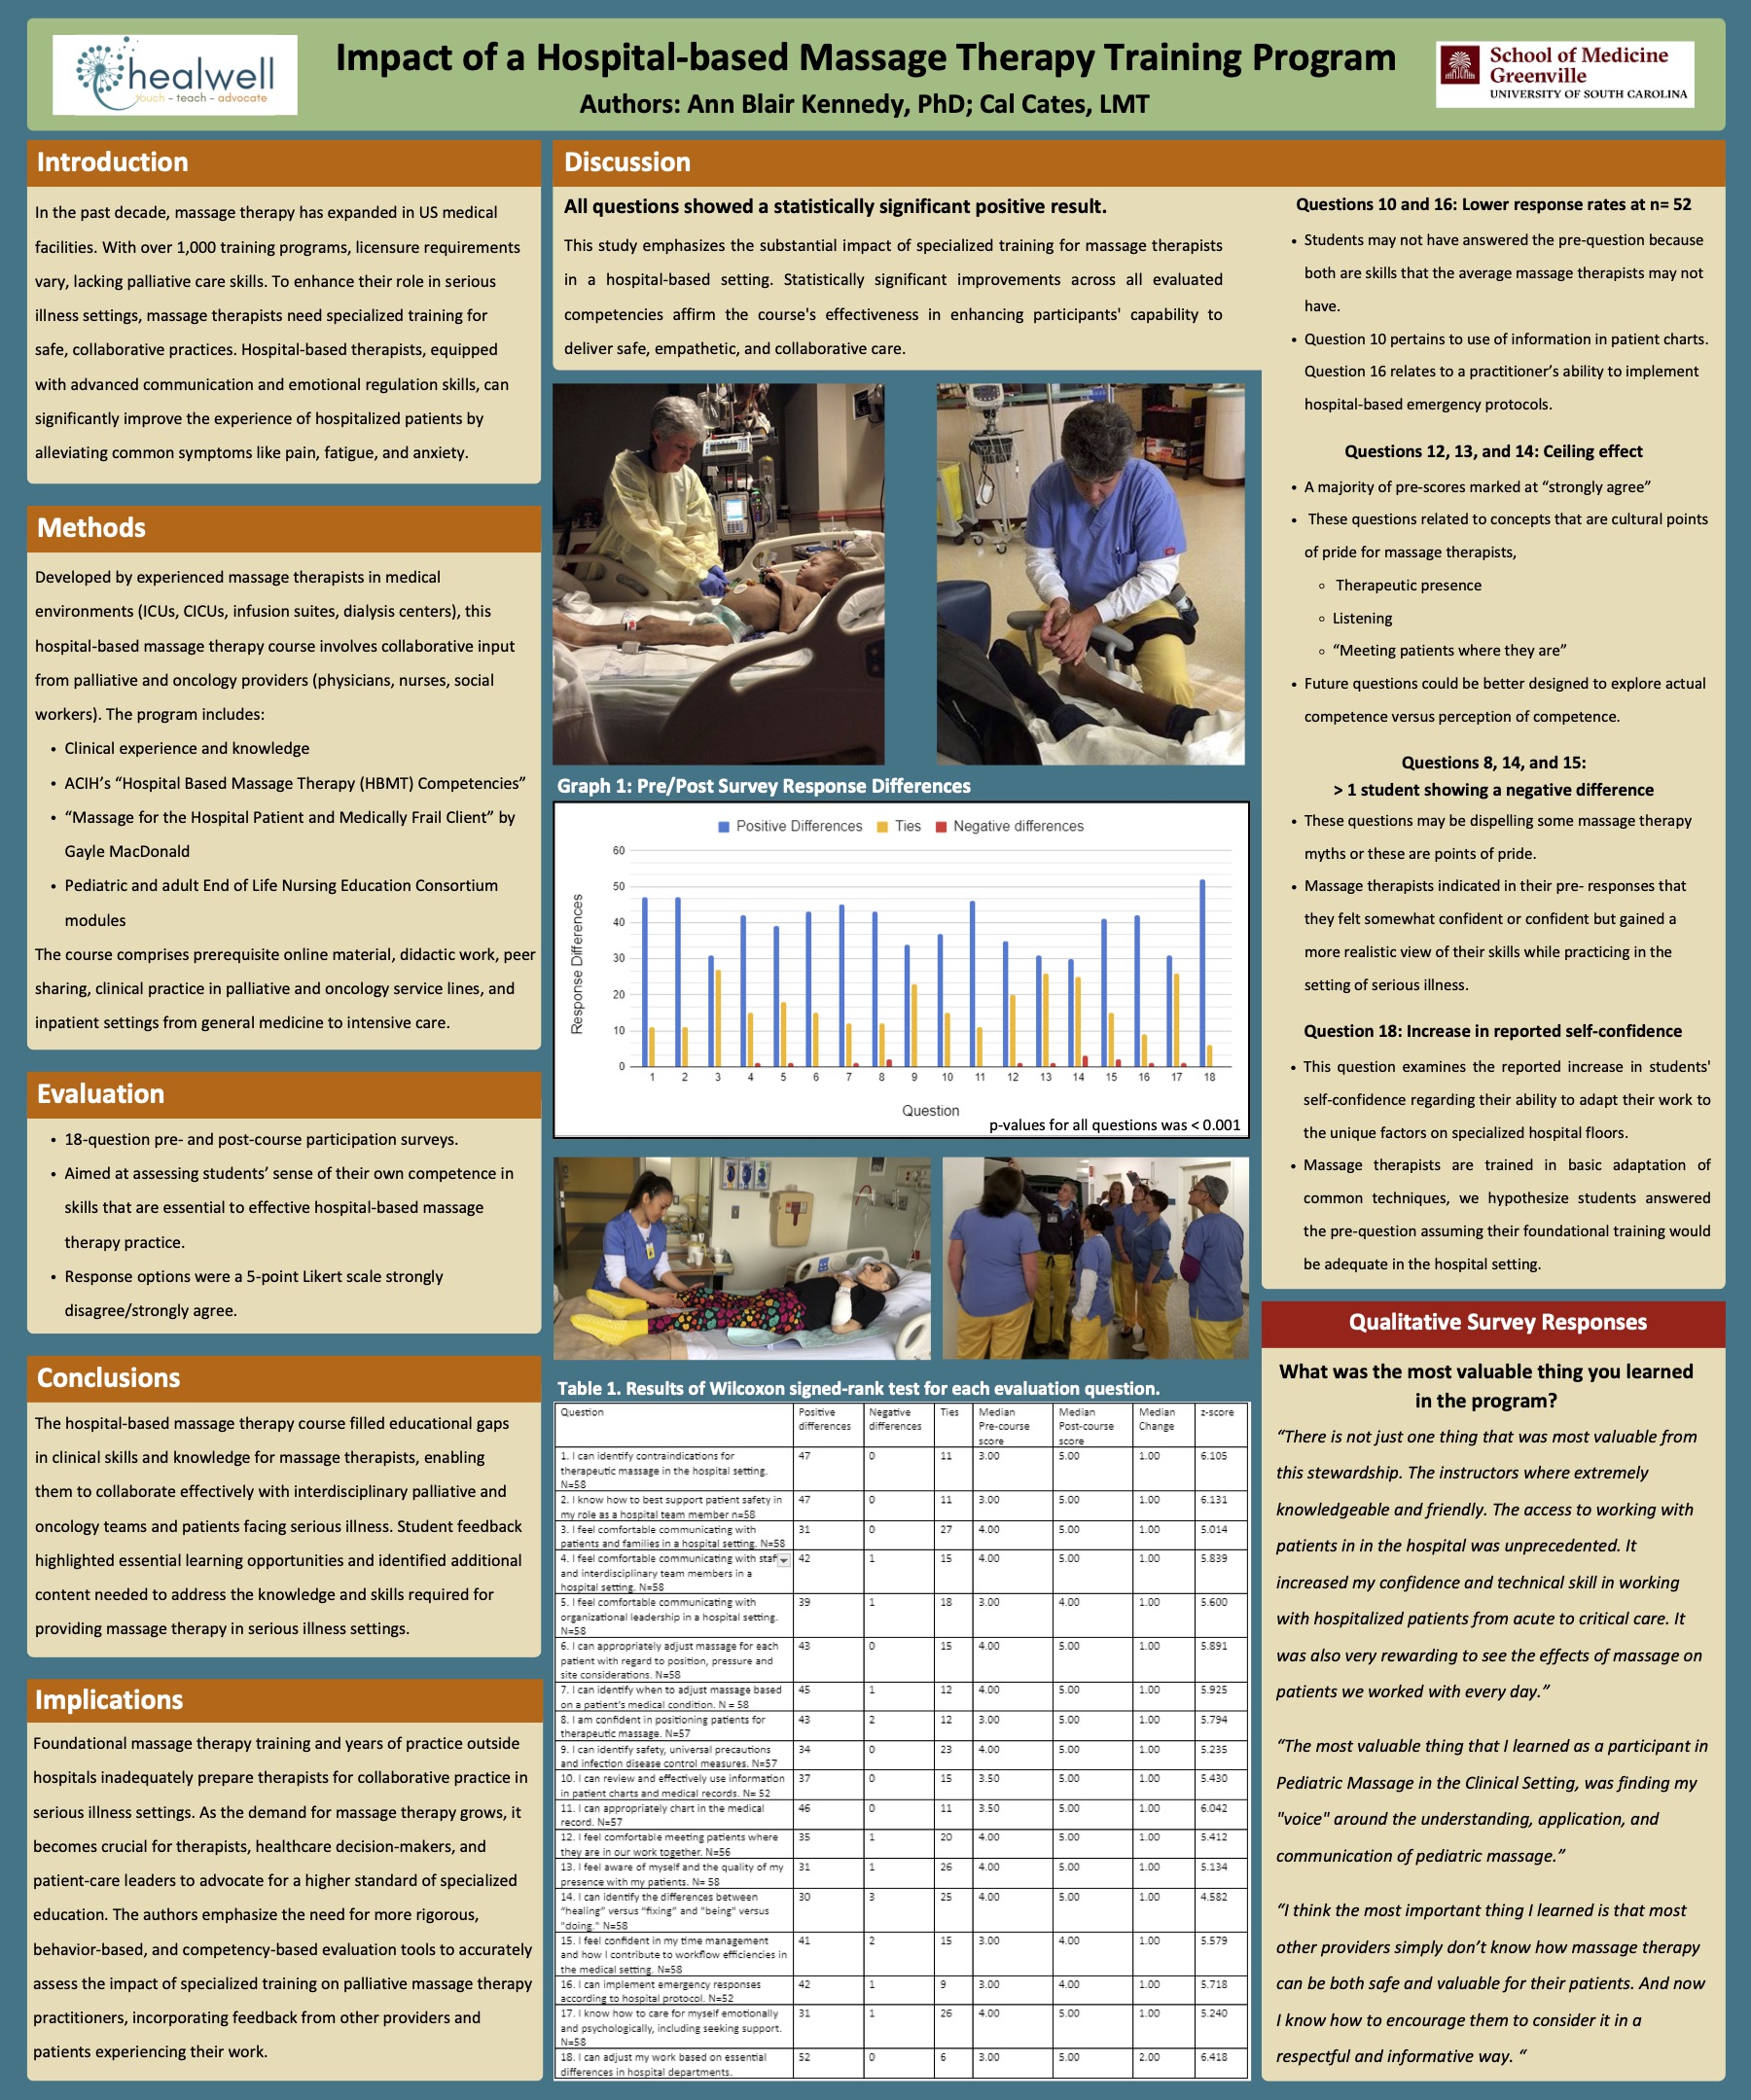 Impact of a Hospital-based Massage Therapy Training Program poster